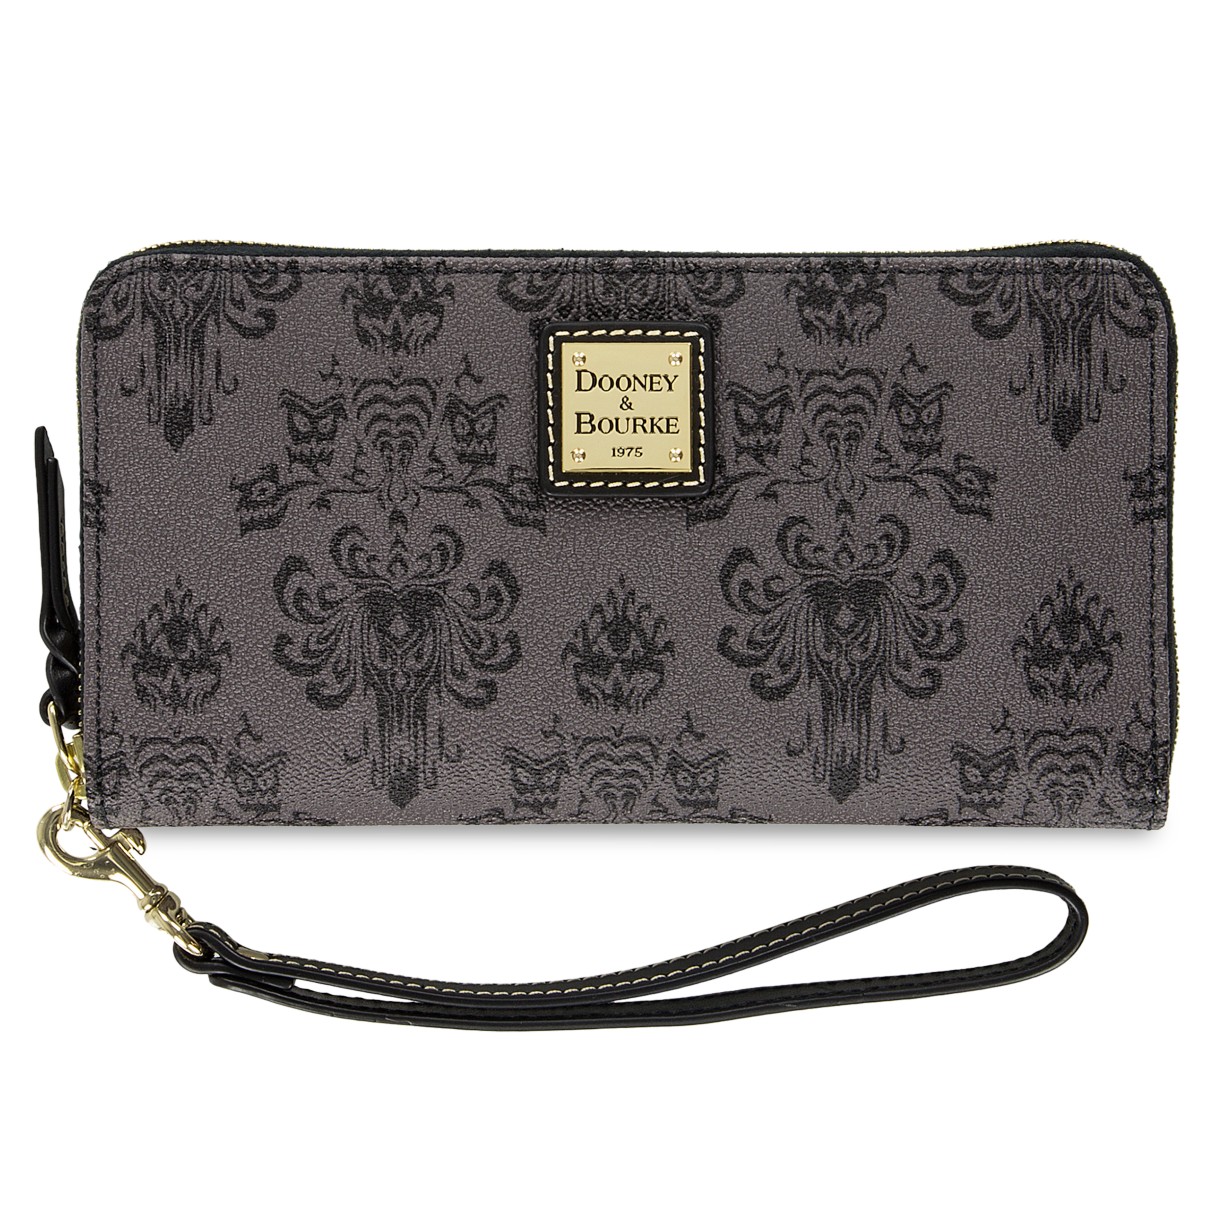 The Haunted Mansion Wallet by Dooney & Bourke